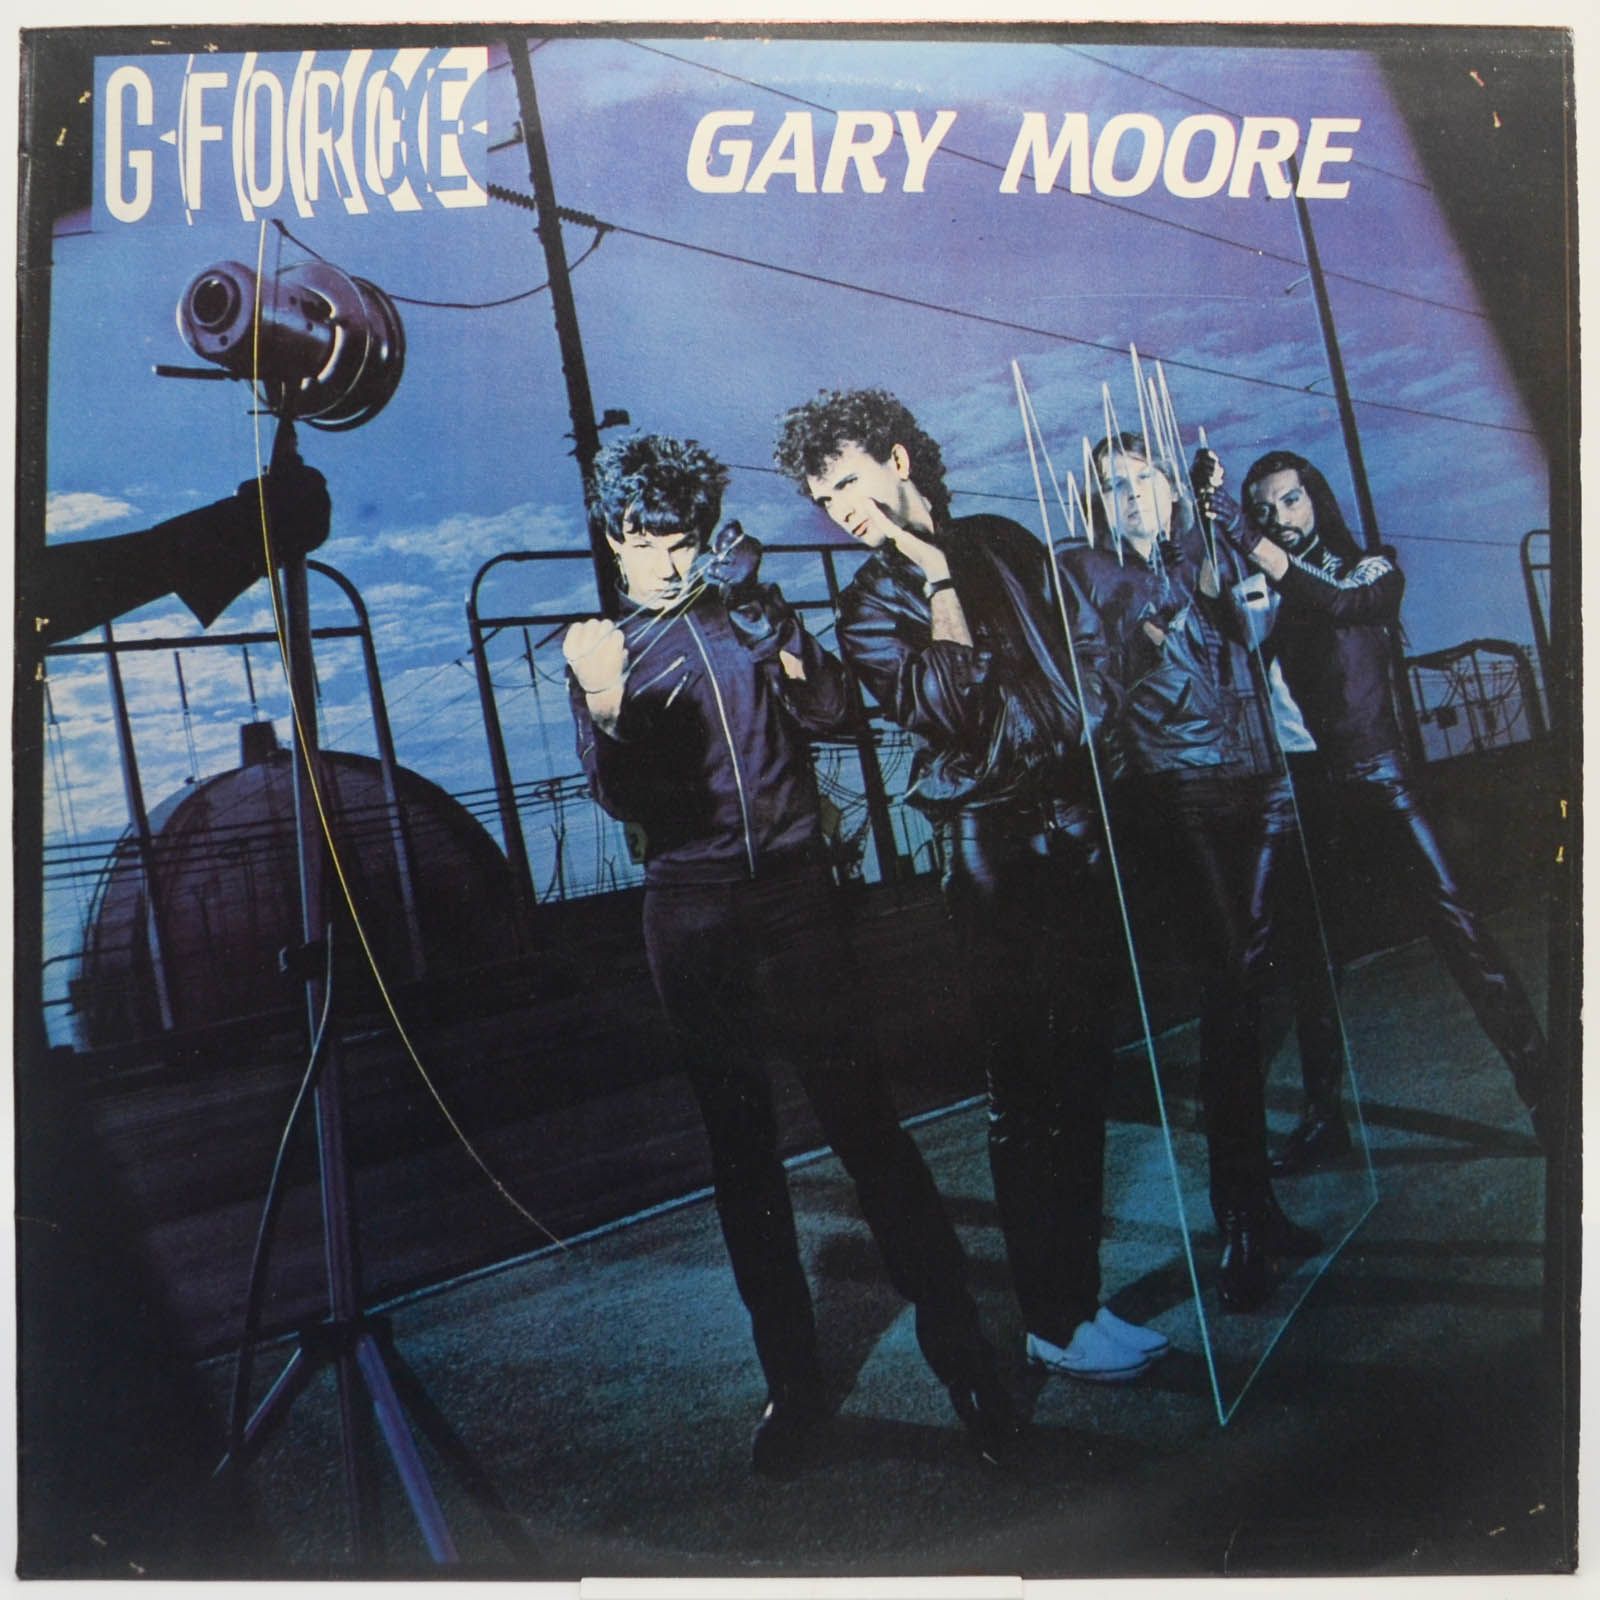 G-Force & Gary Moore — G-Force, 1980